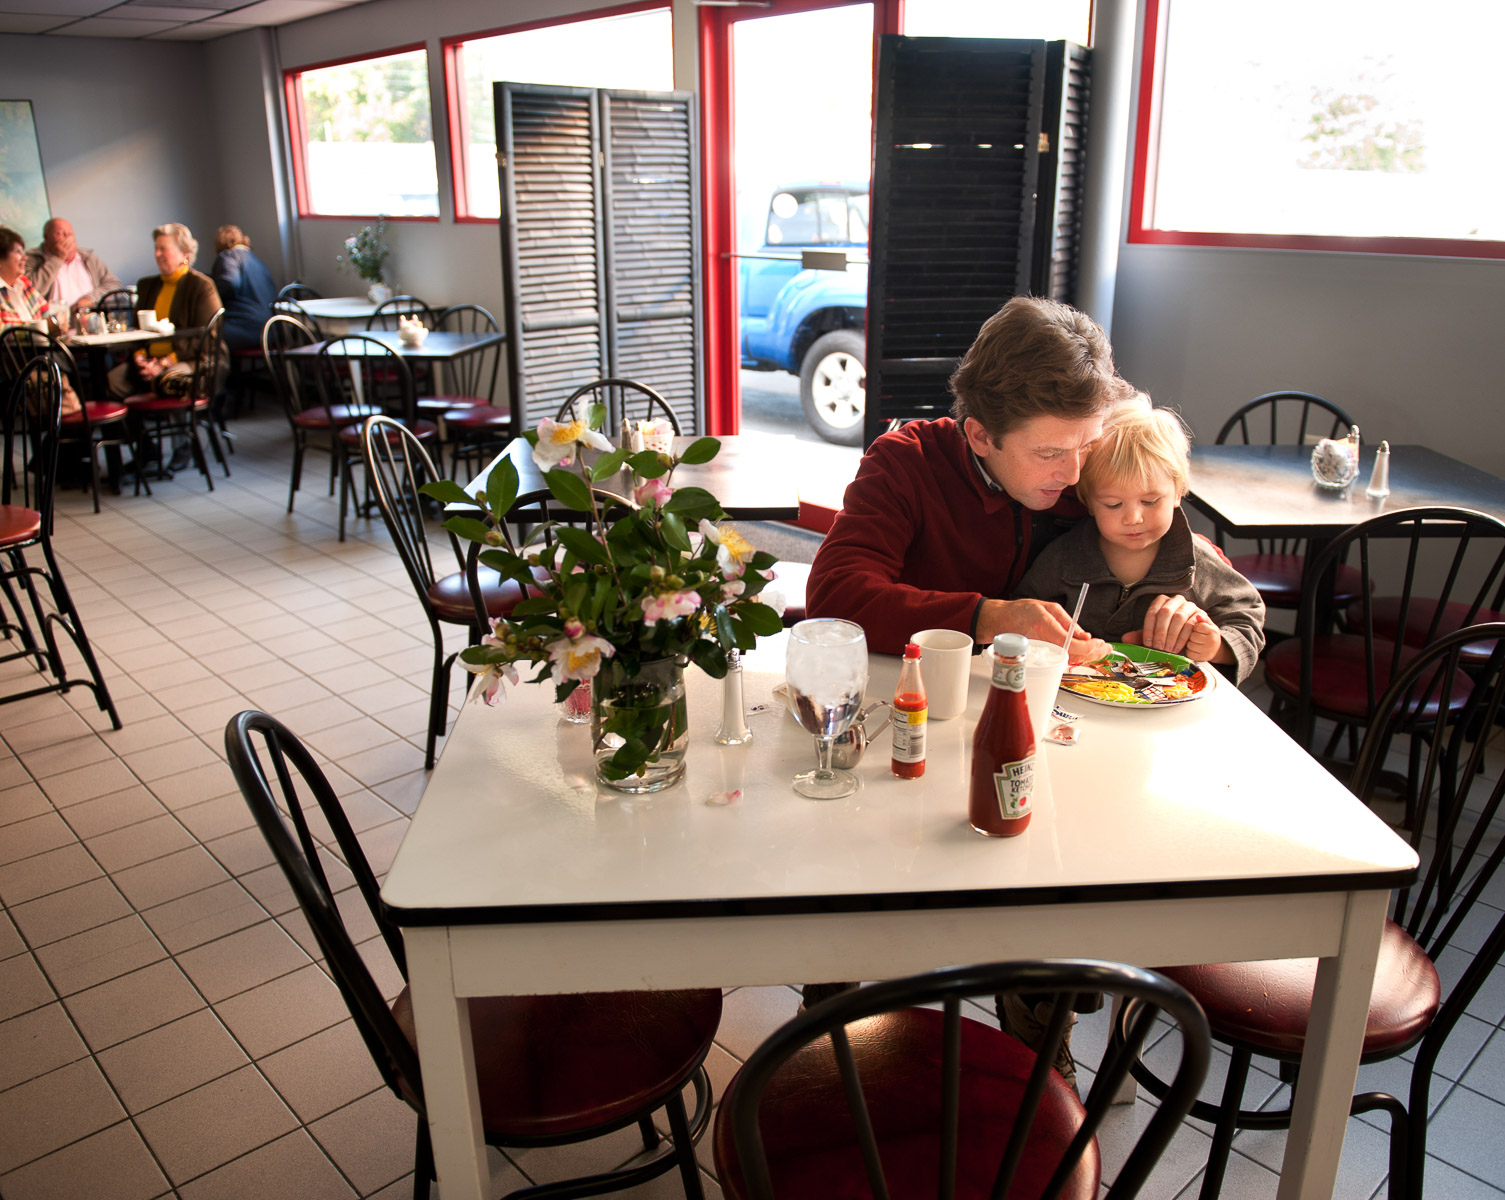 Huw Bower and his son Olly Bower eat breakfast at the Car Wash Café on route 3 in the historic town of Kilmarnock in the northern neck of Virginia. November 2, 2012. Vanessa Vick for The New York Times